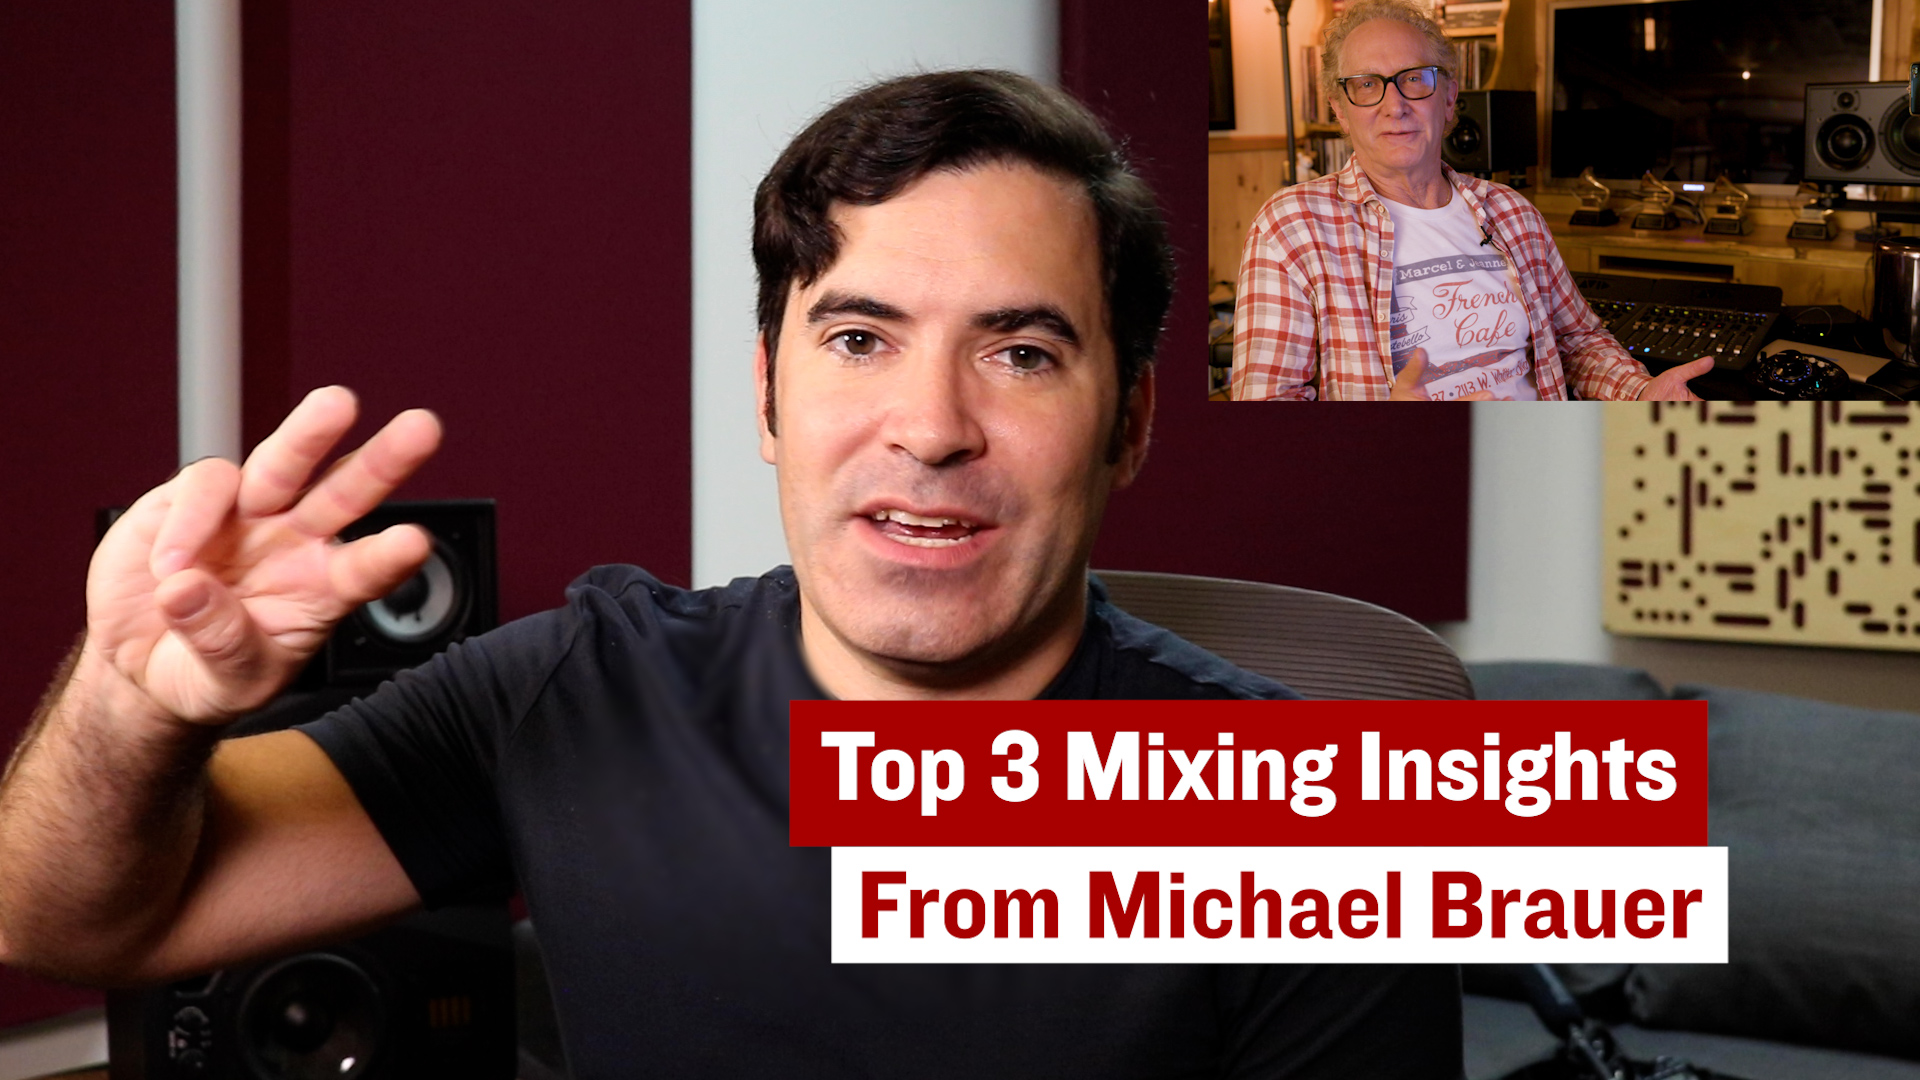 Top 3 Mixing Insights from Michael Brauer